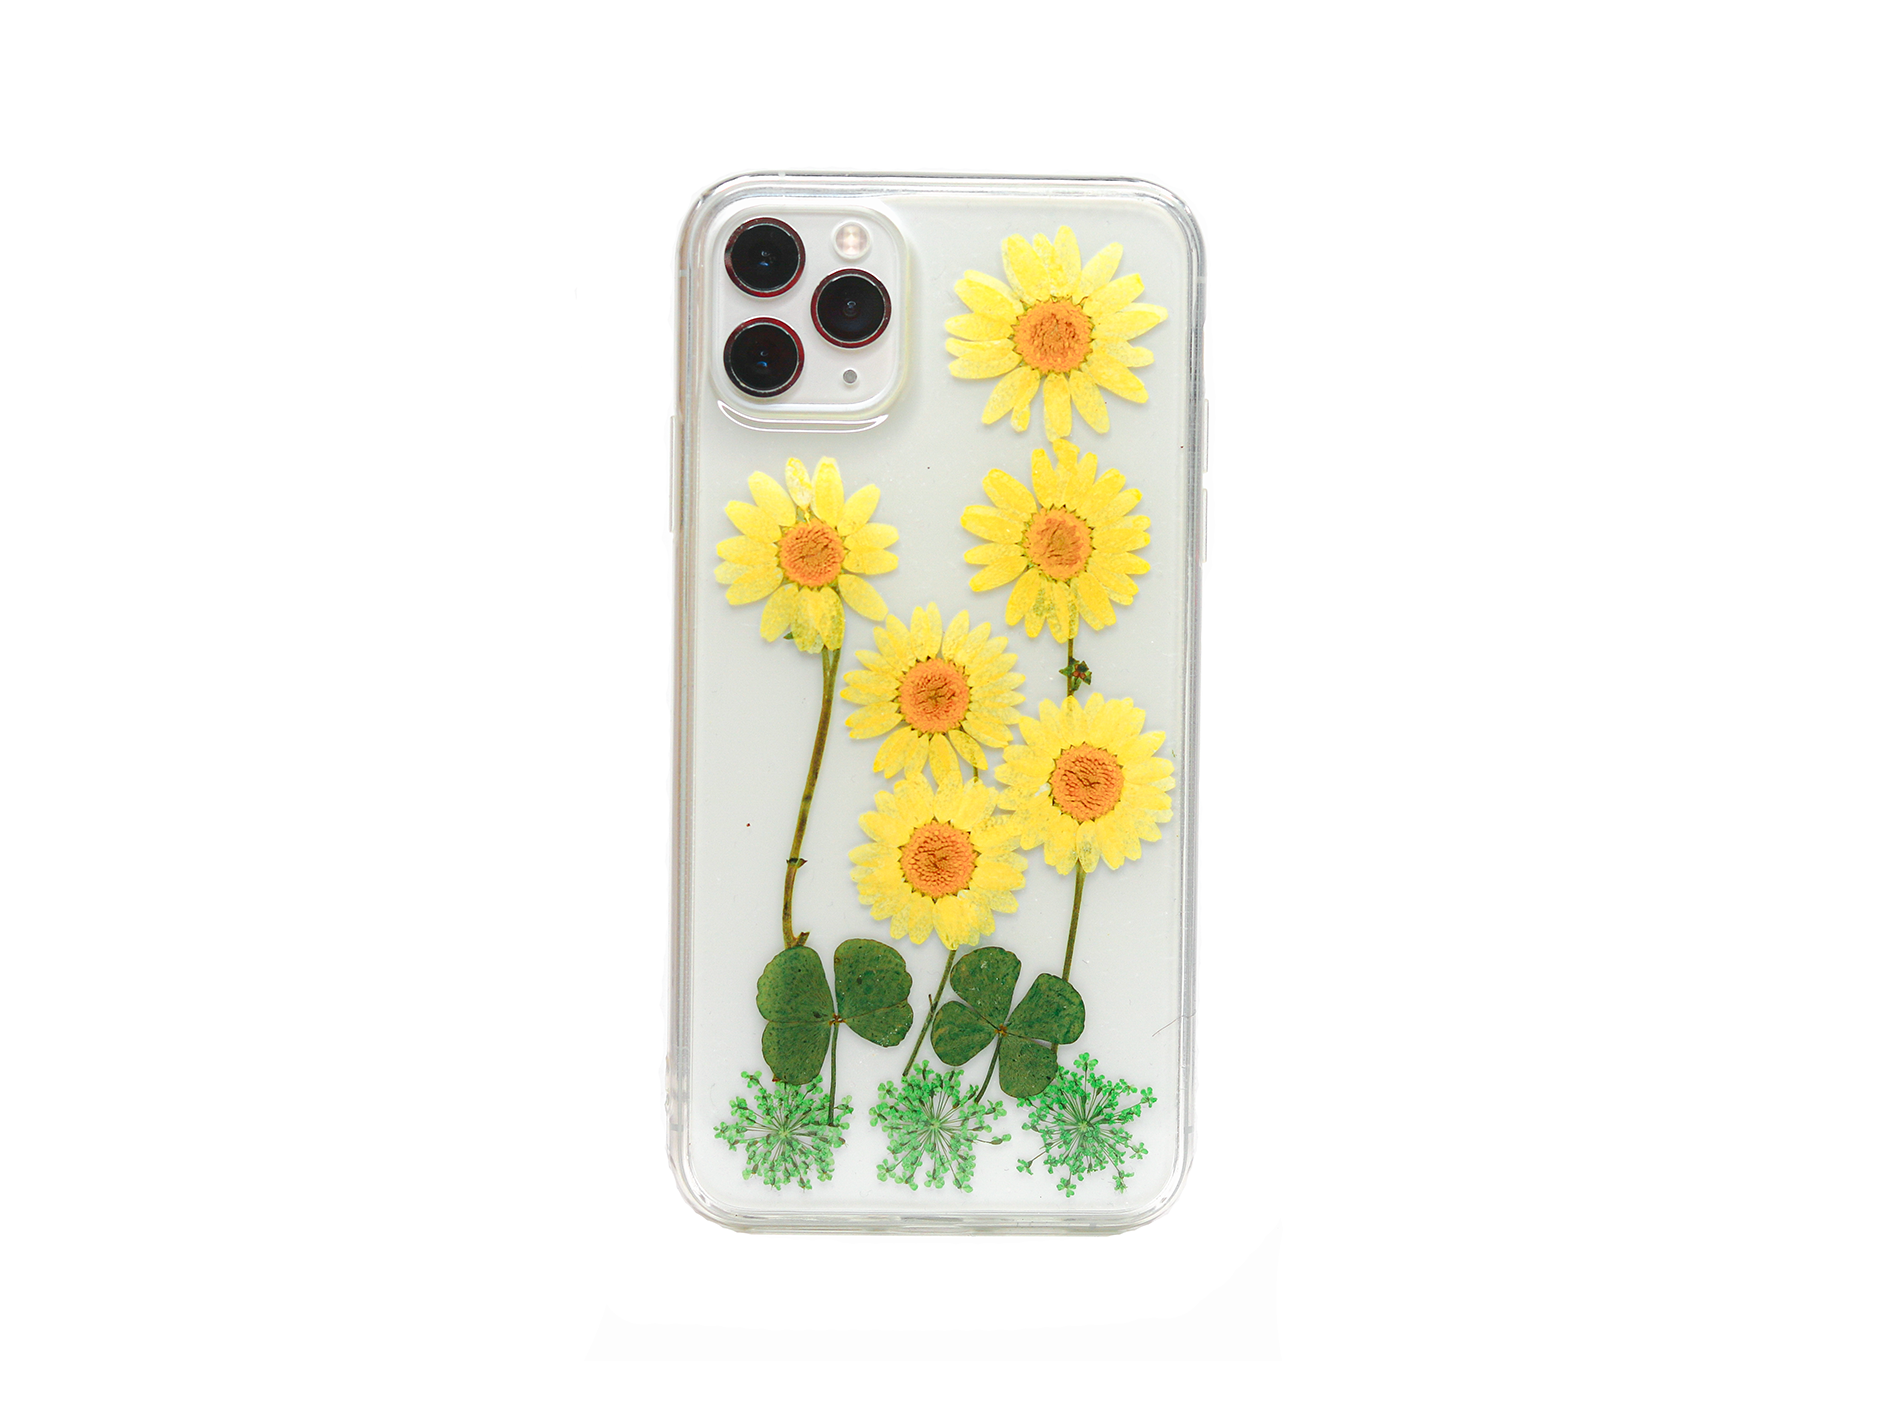 Real Pressed Yellow Daisies Phone Case, Sunflowers, Samsung Galaxy S10 S9 S8 S7, iphone case, iPhone SE 5 6 6s 7 8 plus x xr xs 11 12 13 pro max case